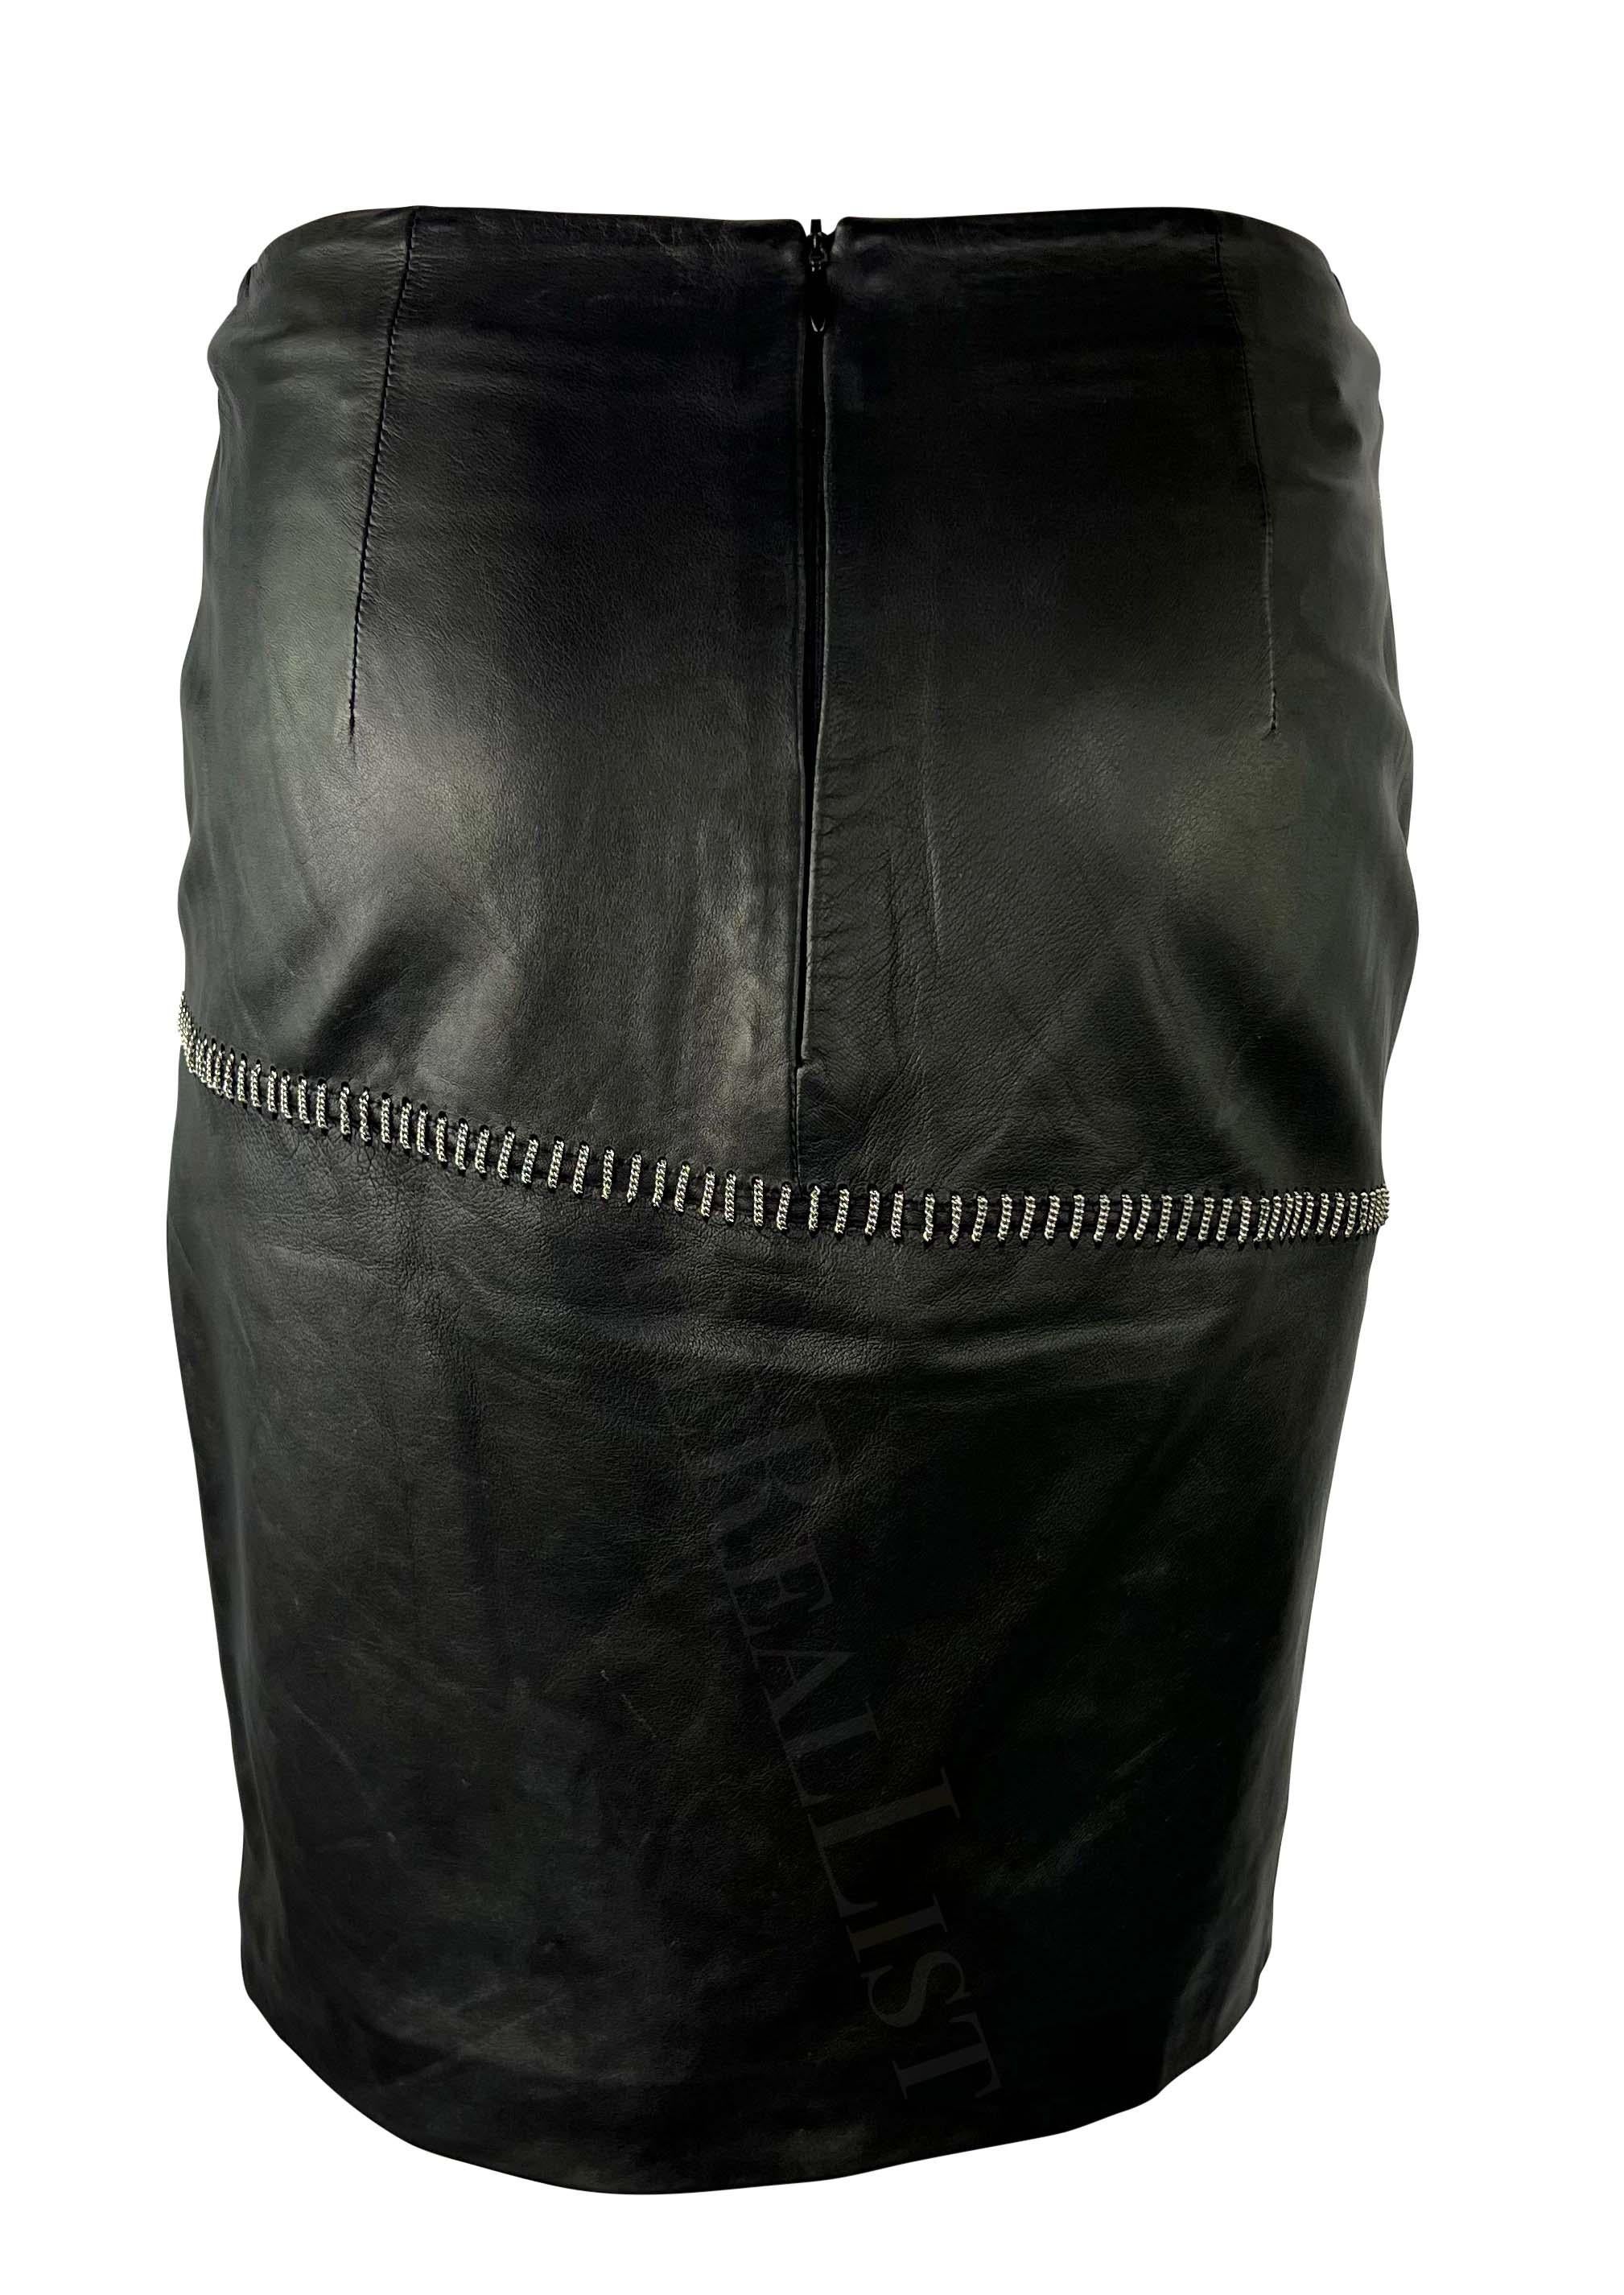 S/S 1999 Gianni Versace by Donatella Black Leather Silver Chain Mini Skirt For Sale 1